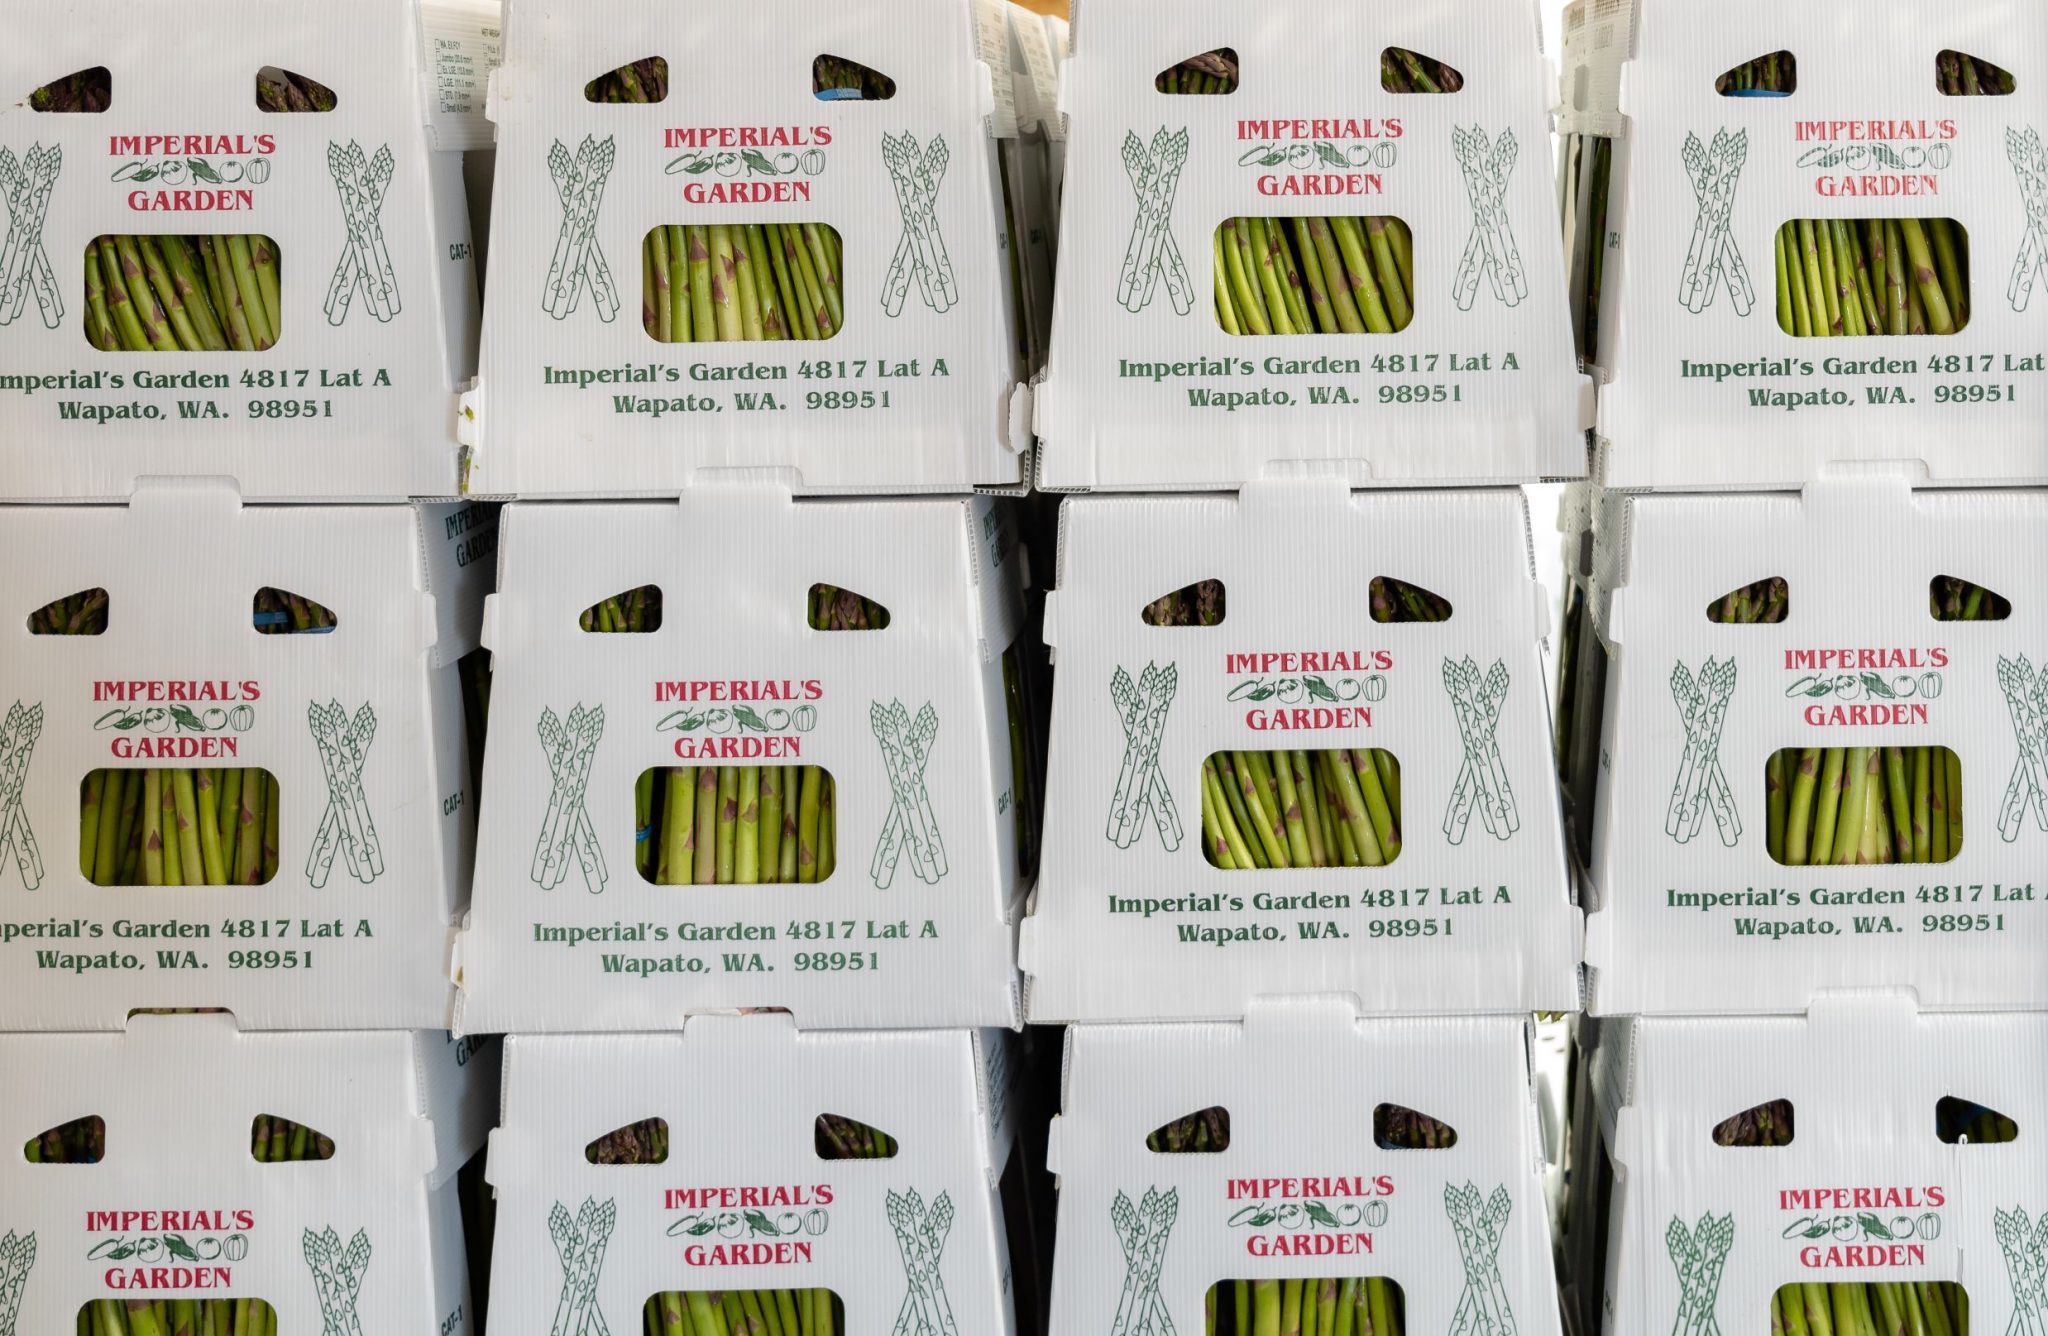 Boxes full of asparagus are stacked in a warehouse, boxes are white and say "Imperial's garden, Wapato, WA"